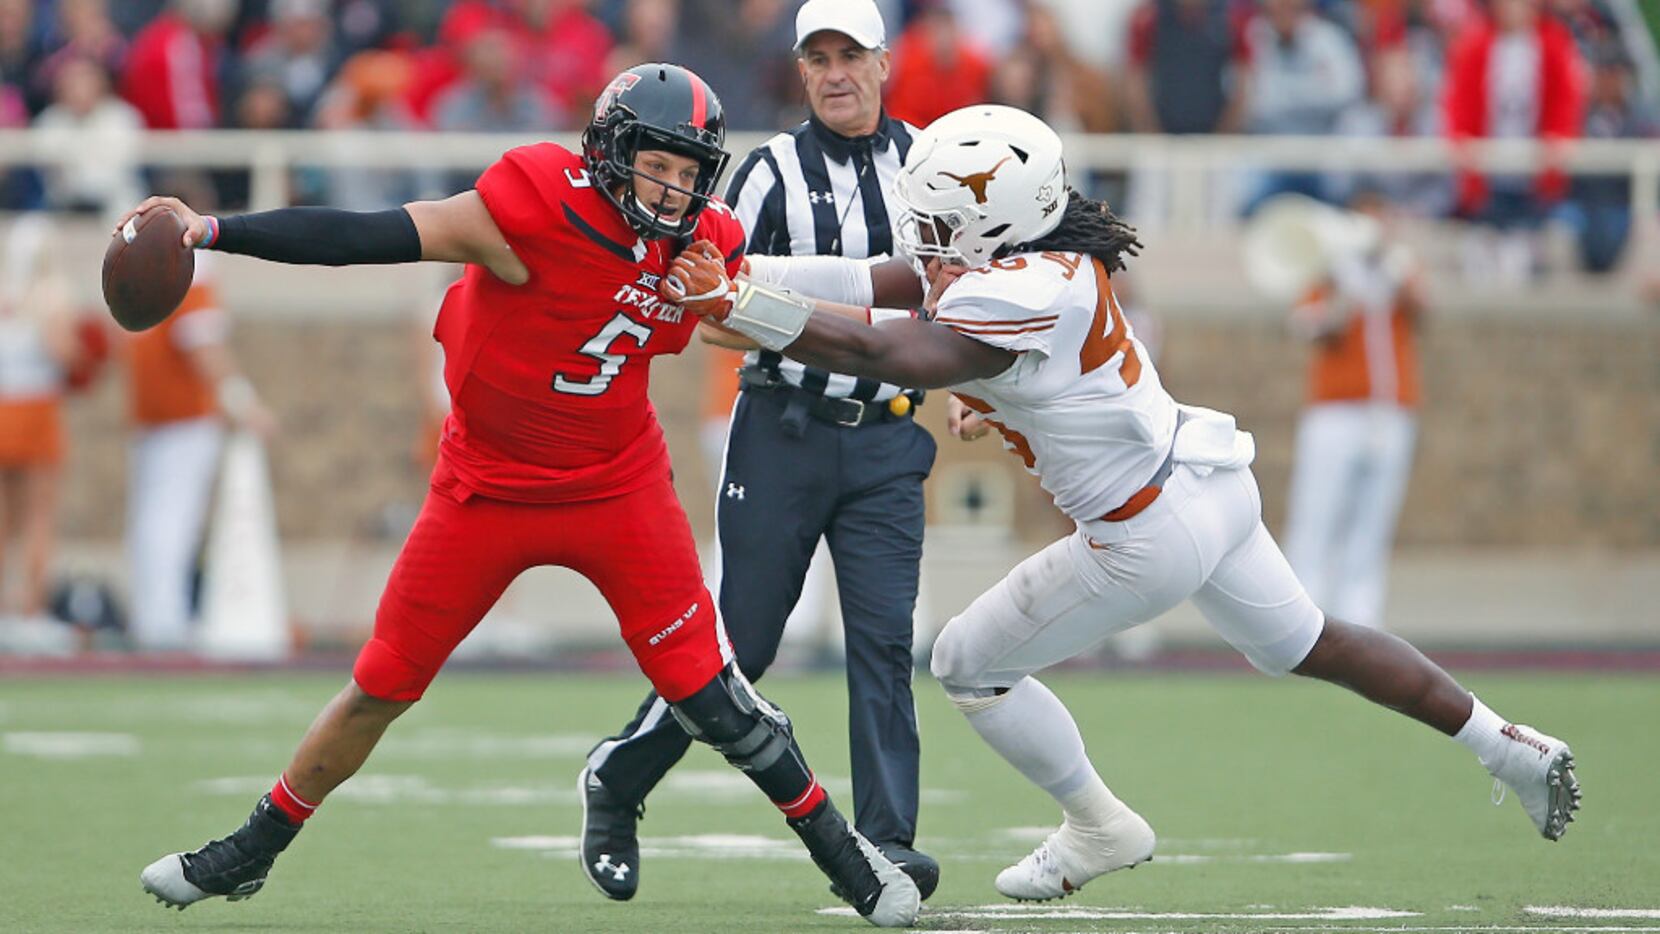 Texas Tech's Patrick Mahomes (5) tries to avoid being sacked by Texas' Malik Jefferson (46)...